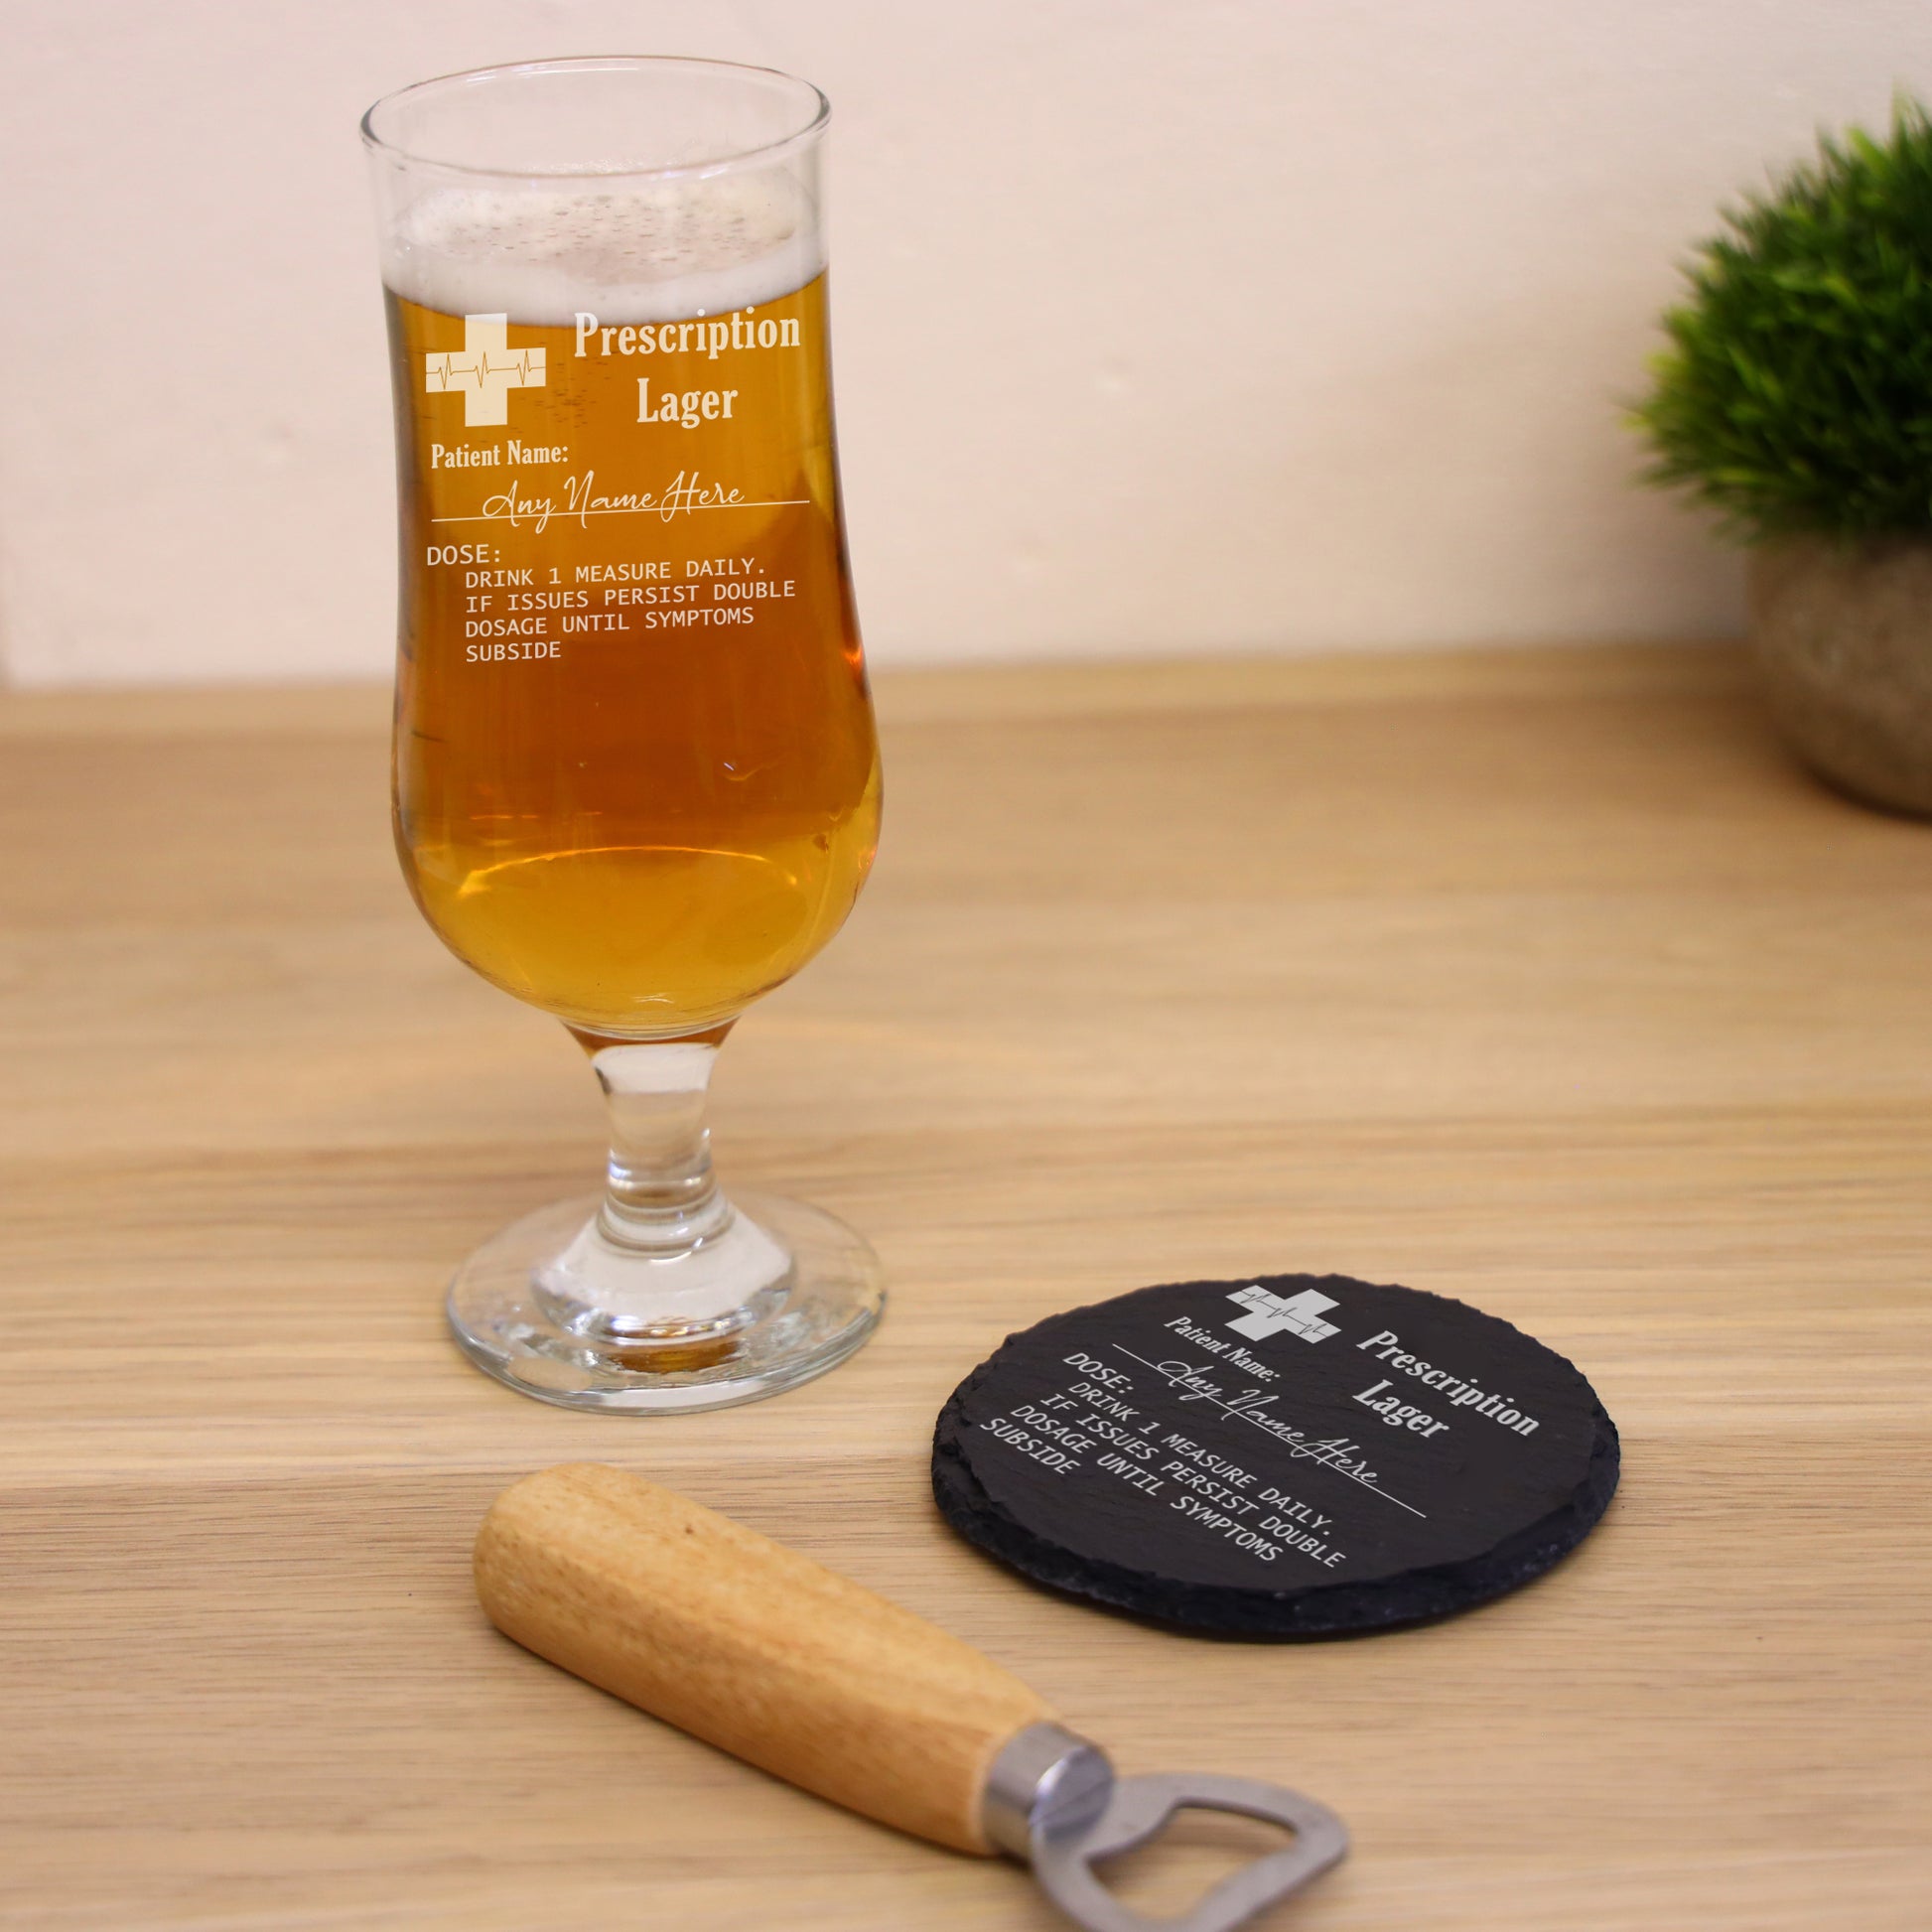 Personalised Engraved ANY GLASS ANY DRINK Prescription Design  - Always Looking Good - Hurricane Pint Glass Round Coaster 